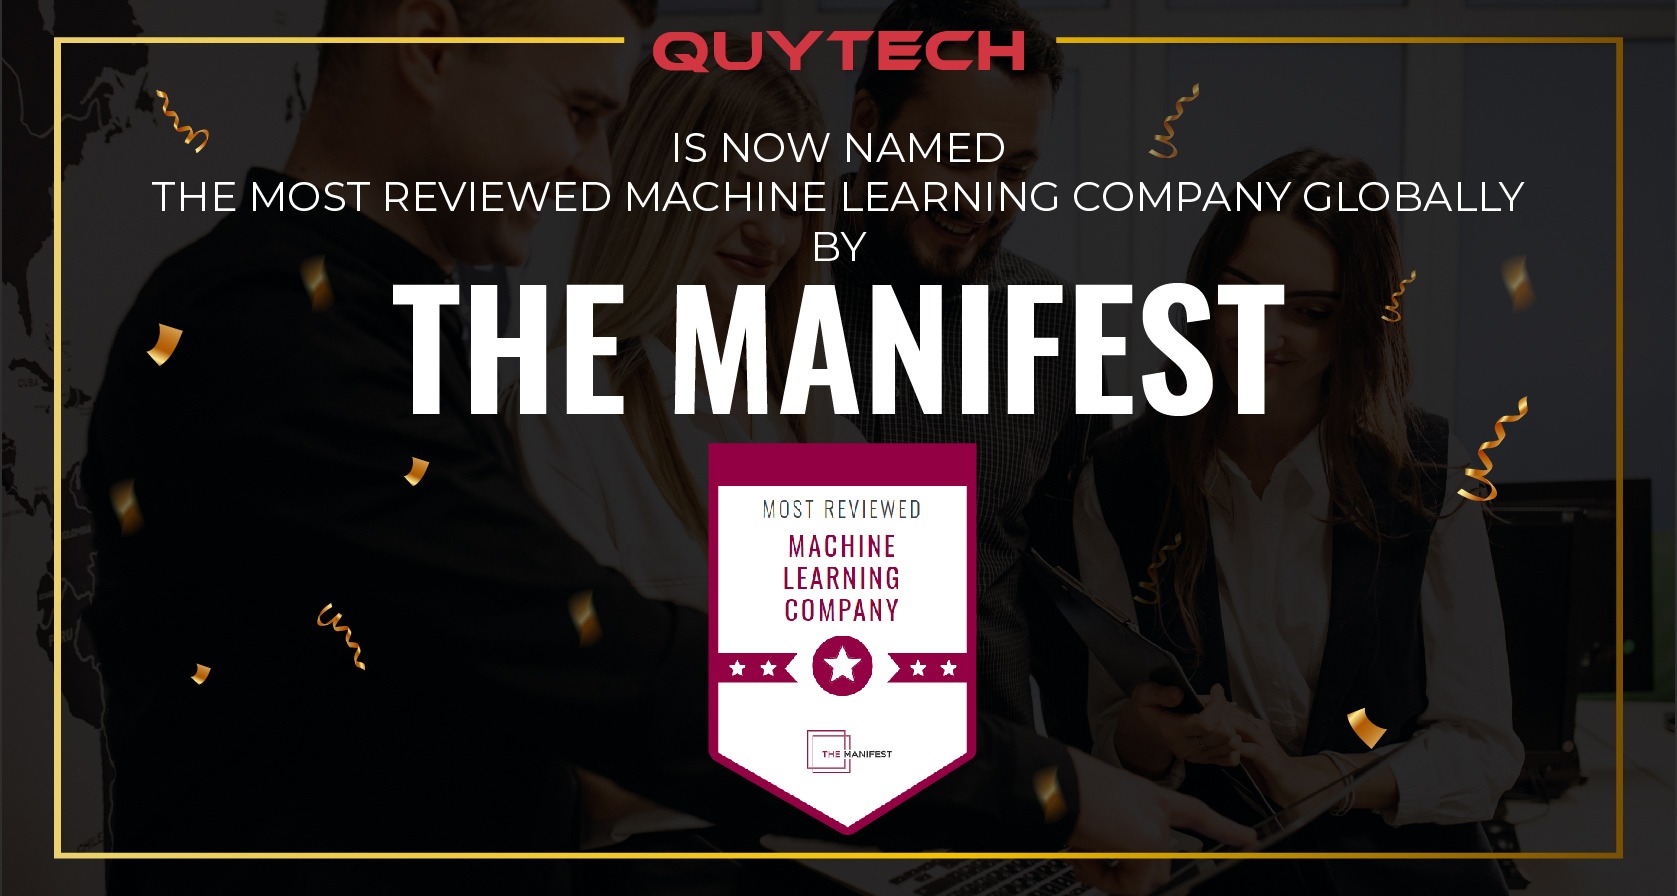 The-Manifest-Names-Quytech-as-top-Machine-Learning-Companies-Globally